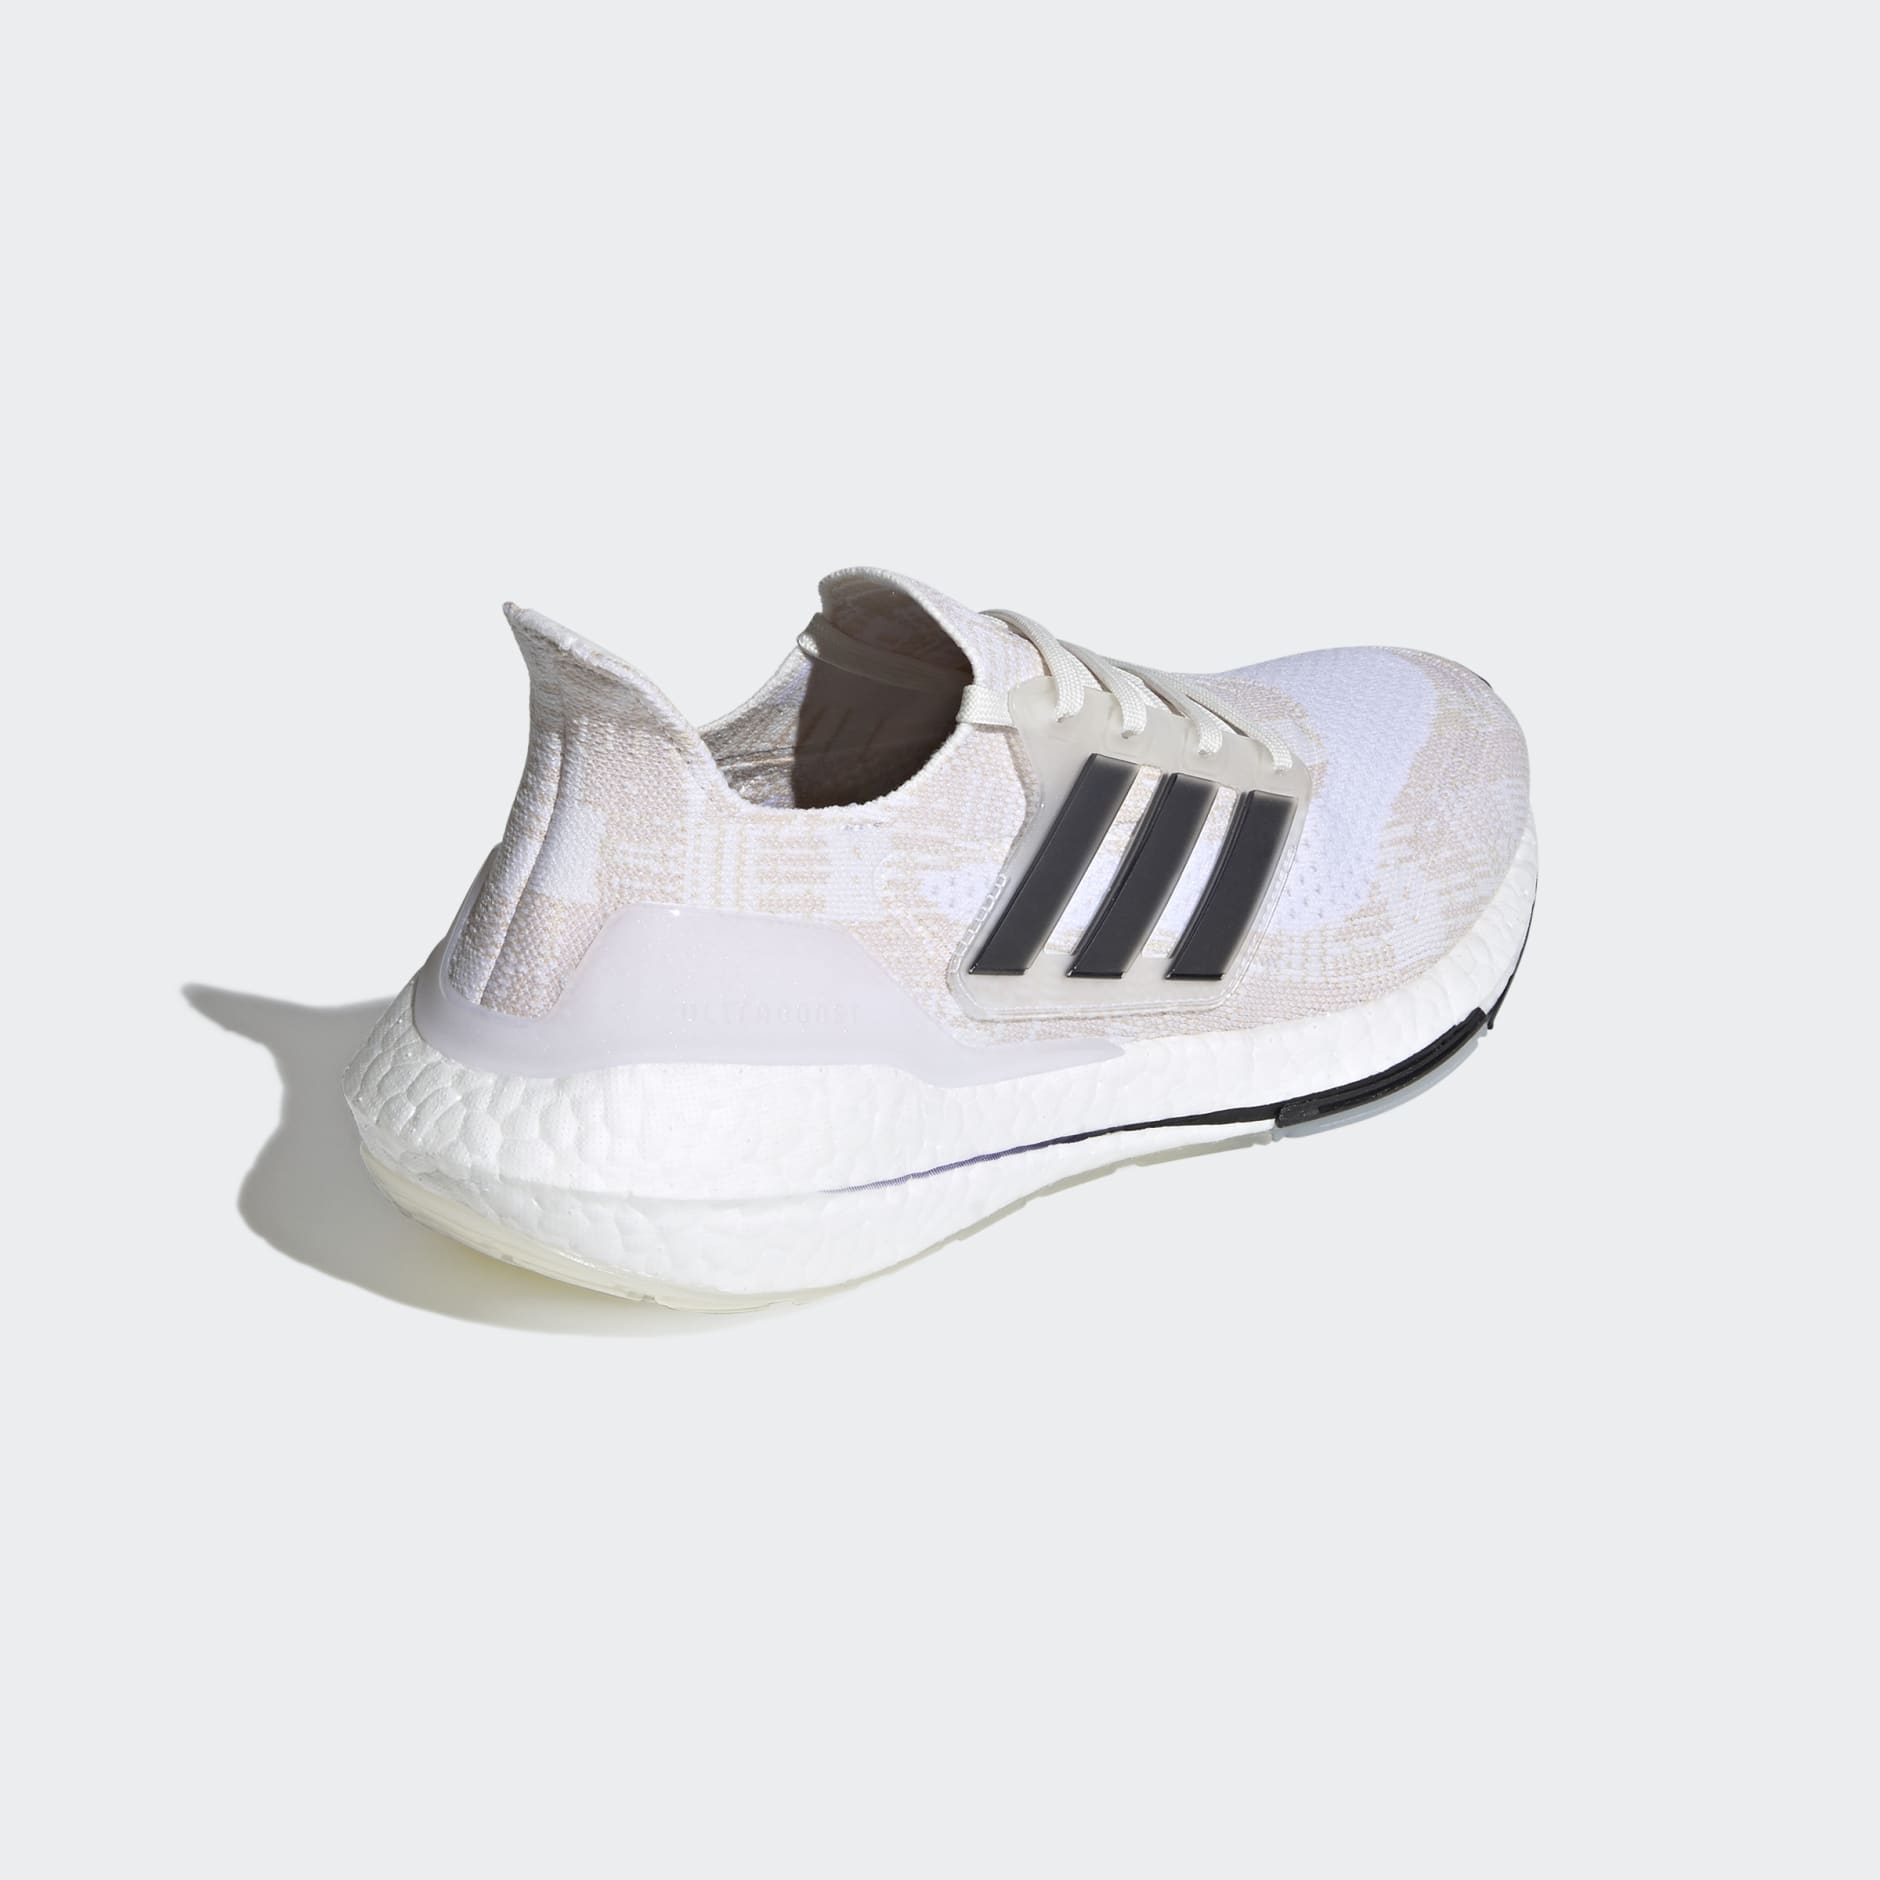 Adidas Ultraboost 21 P White Running Shoes